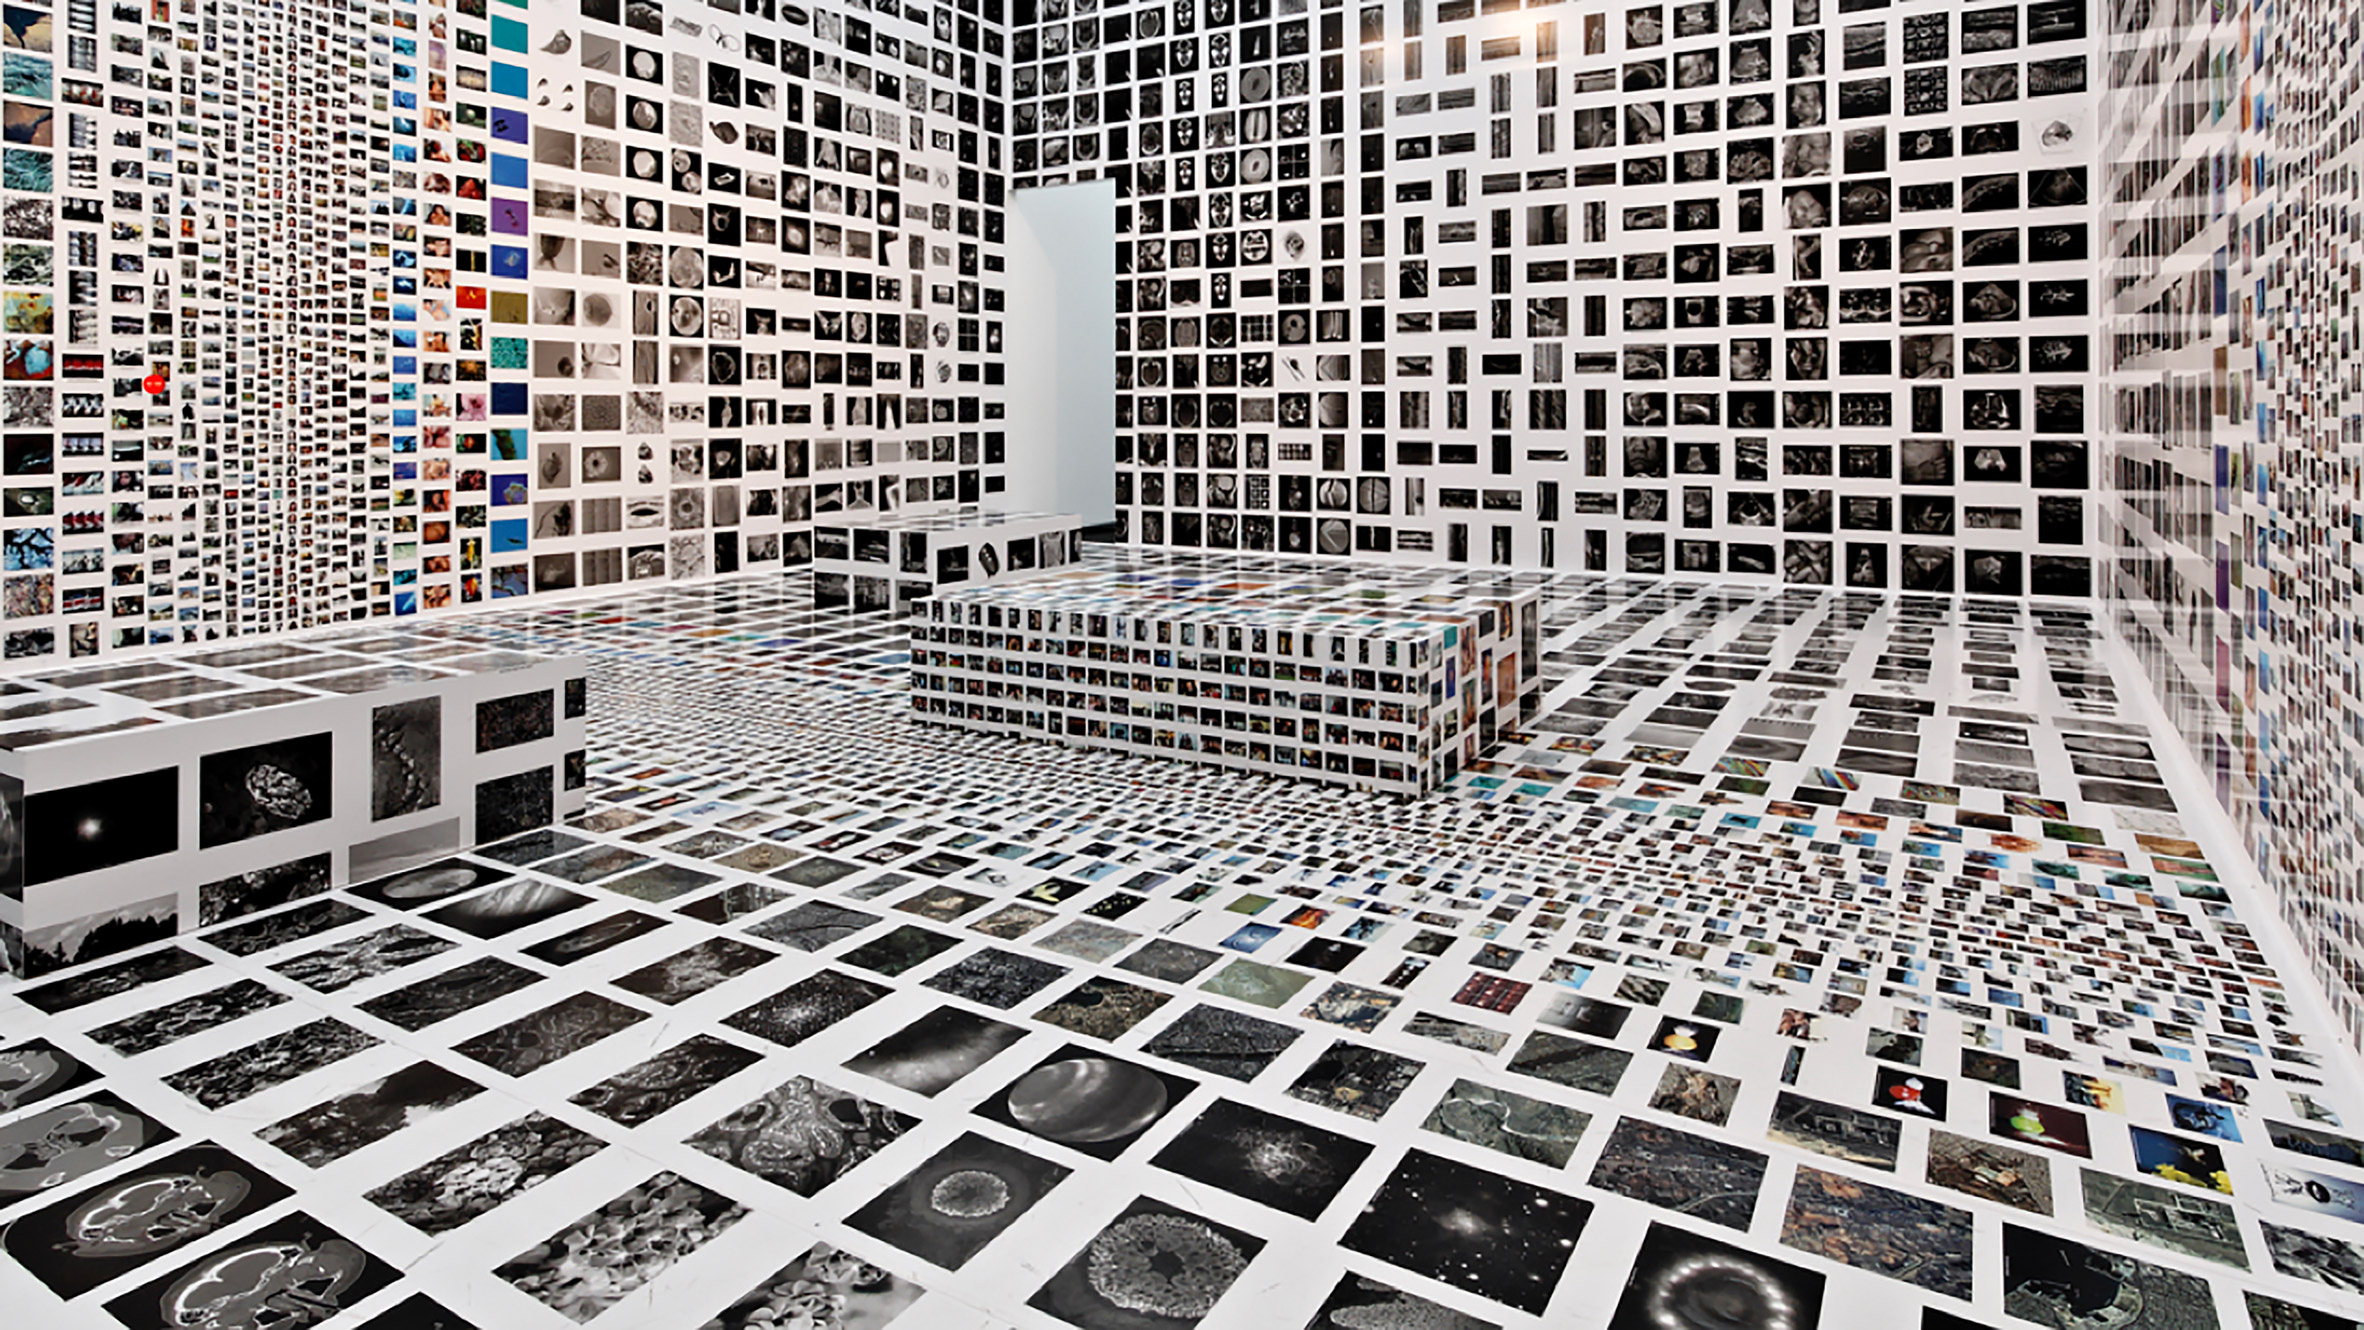 A photograph of MCN's installation showcasing hundreds of photographs